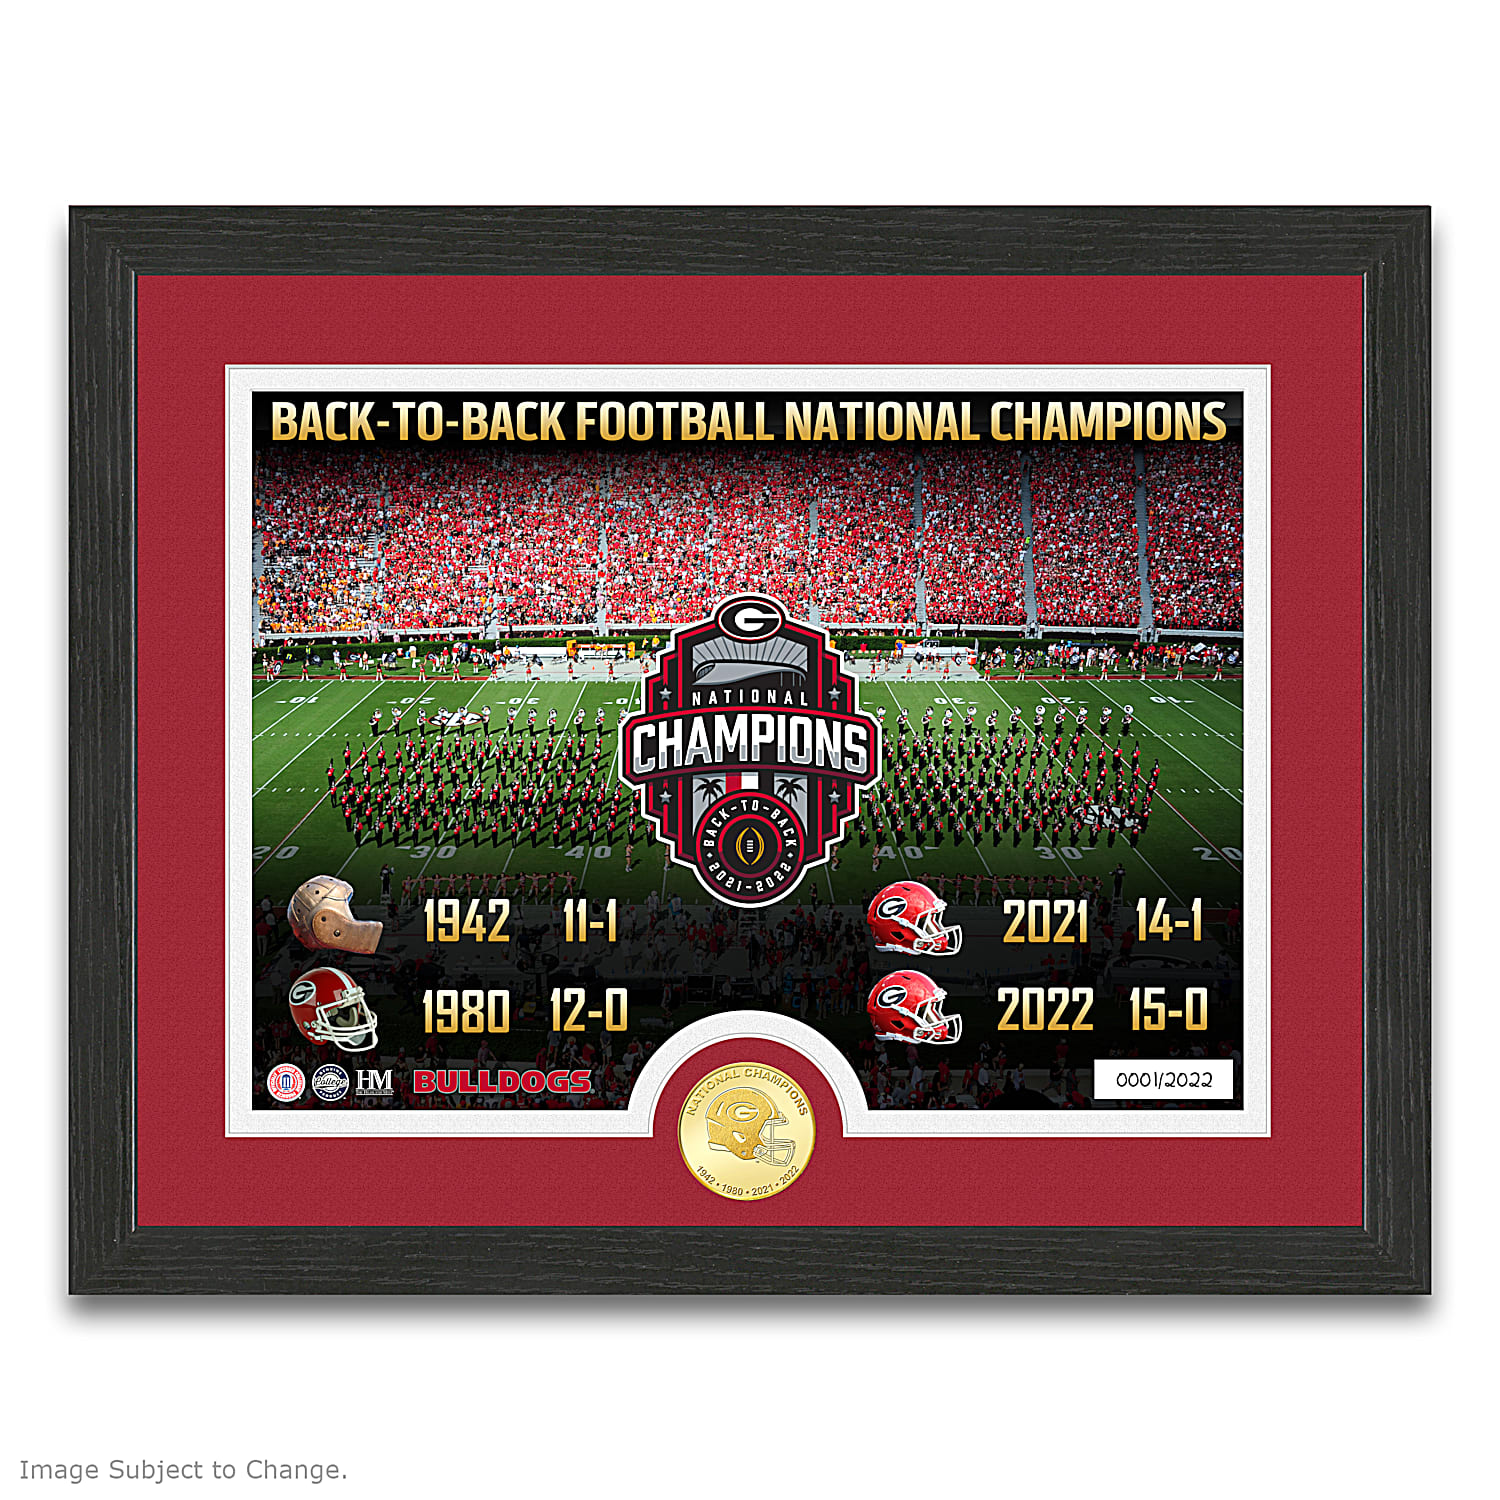 Georgia State Of Champions 2021 Mickey Mouse Georgia Bulldogs And